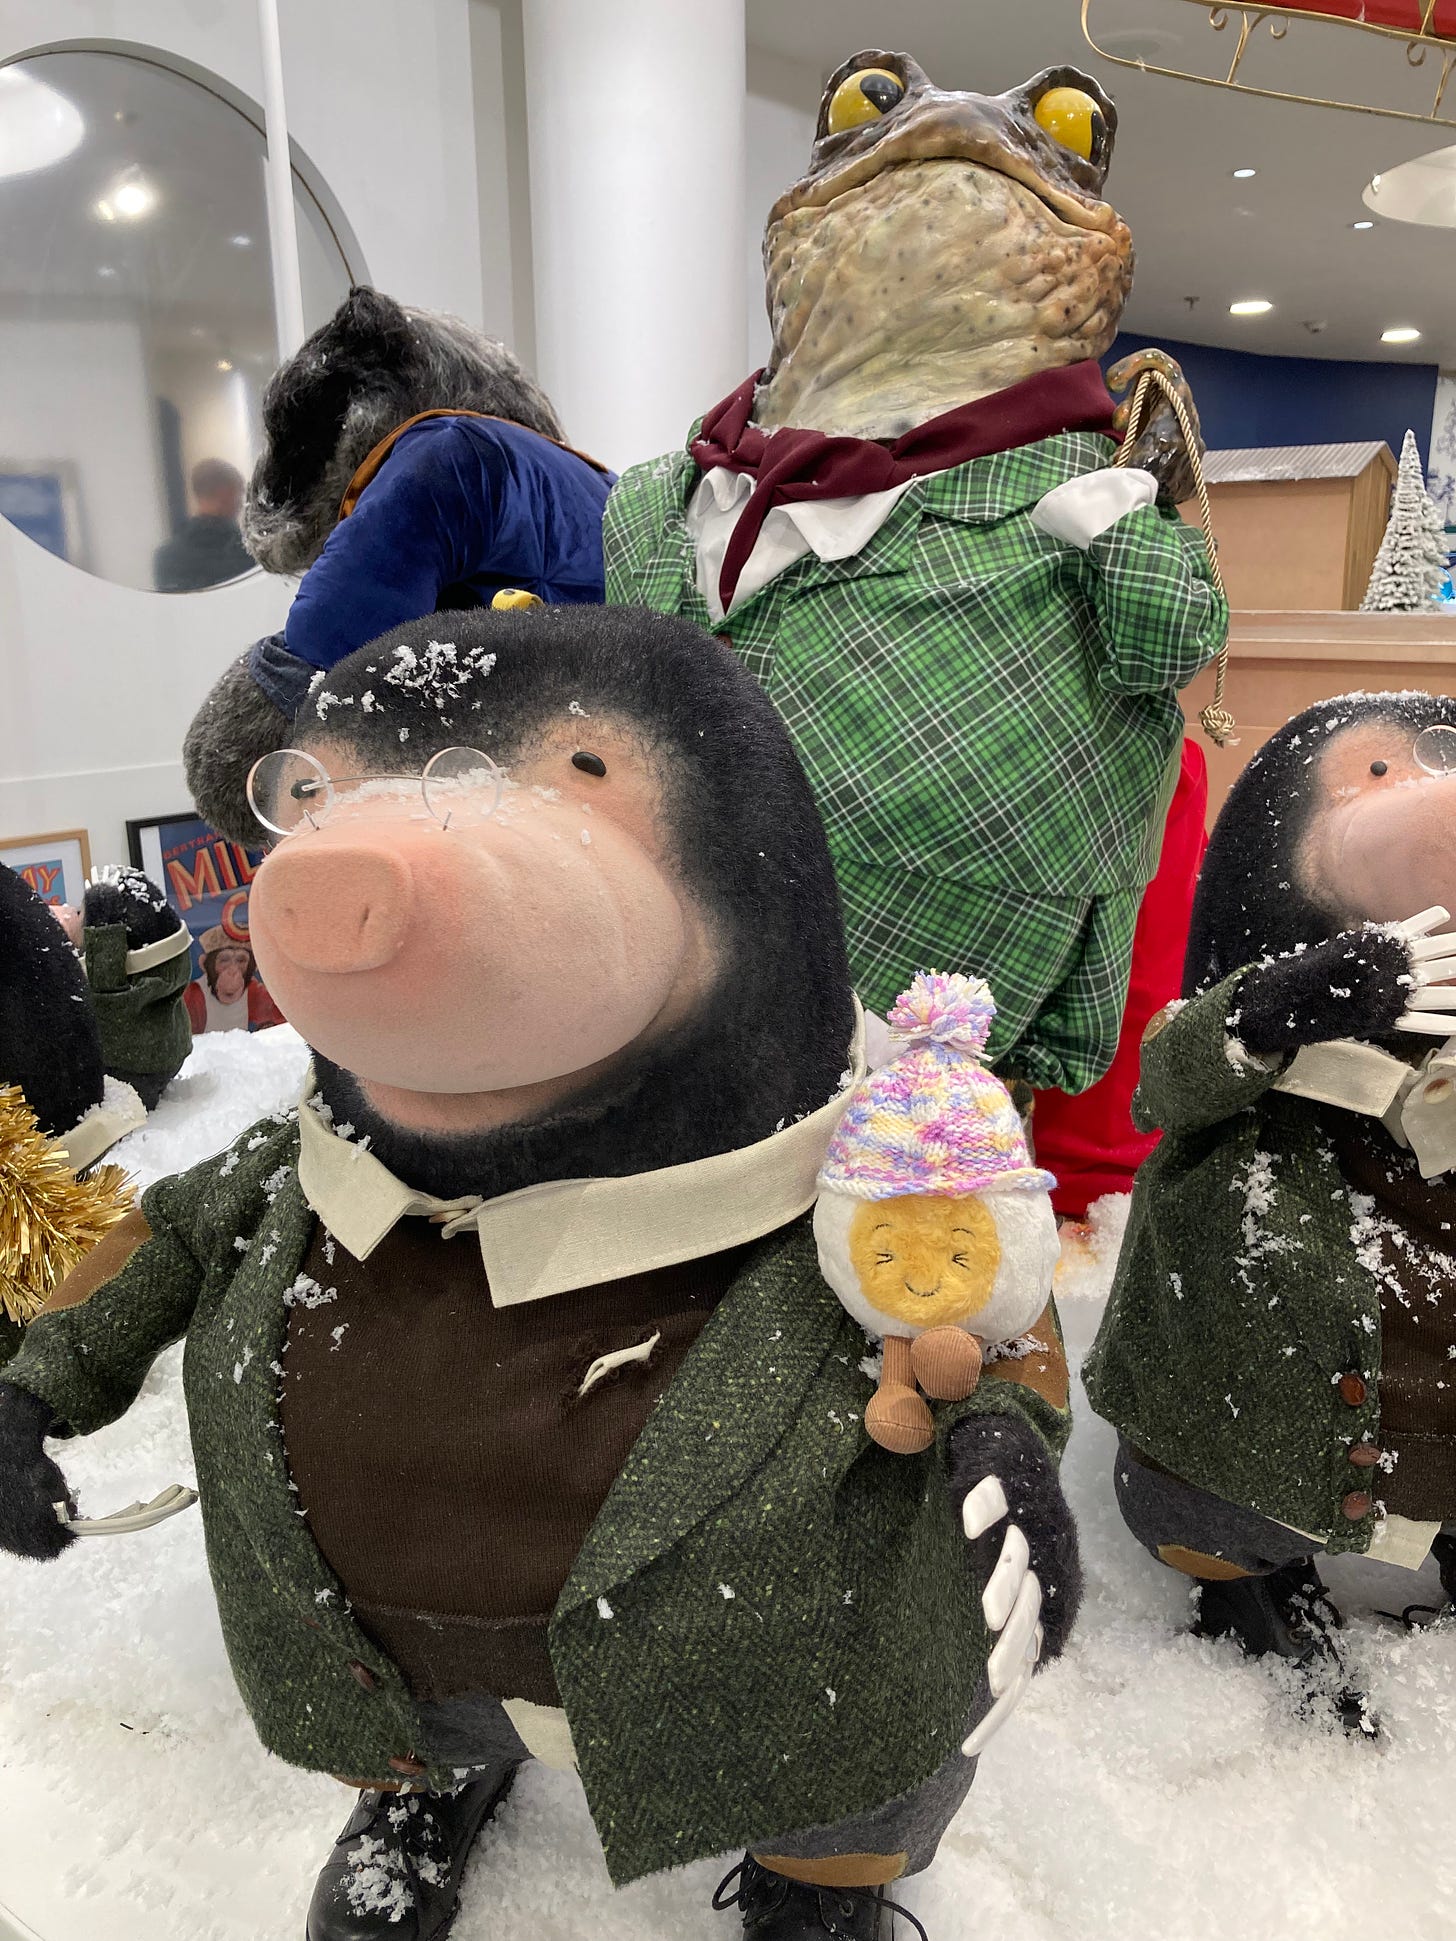 photograph of a mole statue from the book Wind in the Willows, dressed in dapper clothes and surrounded by snow. Dippy the soft toy egg is sitting on the mole's arm and wearing a tiny bobble hat knitted by my auntie